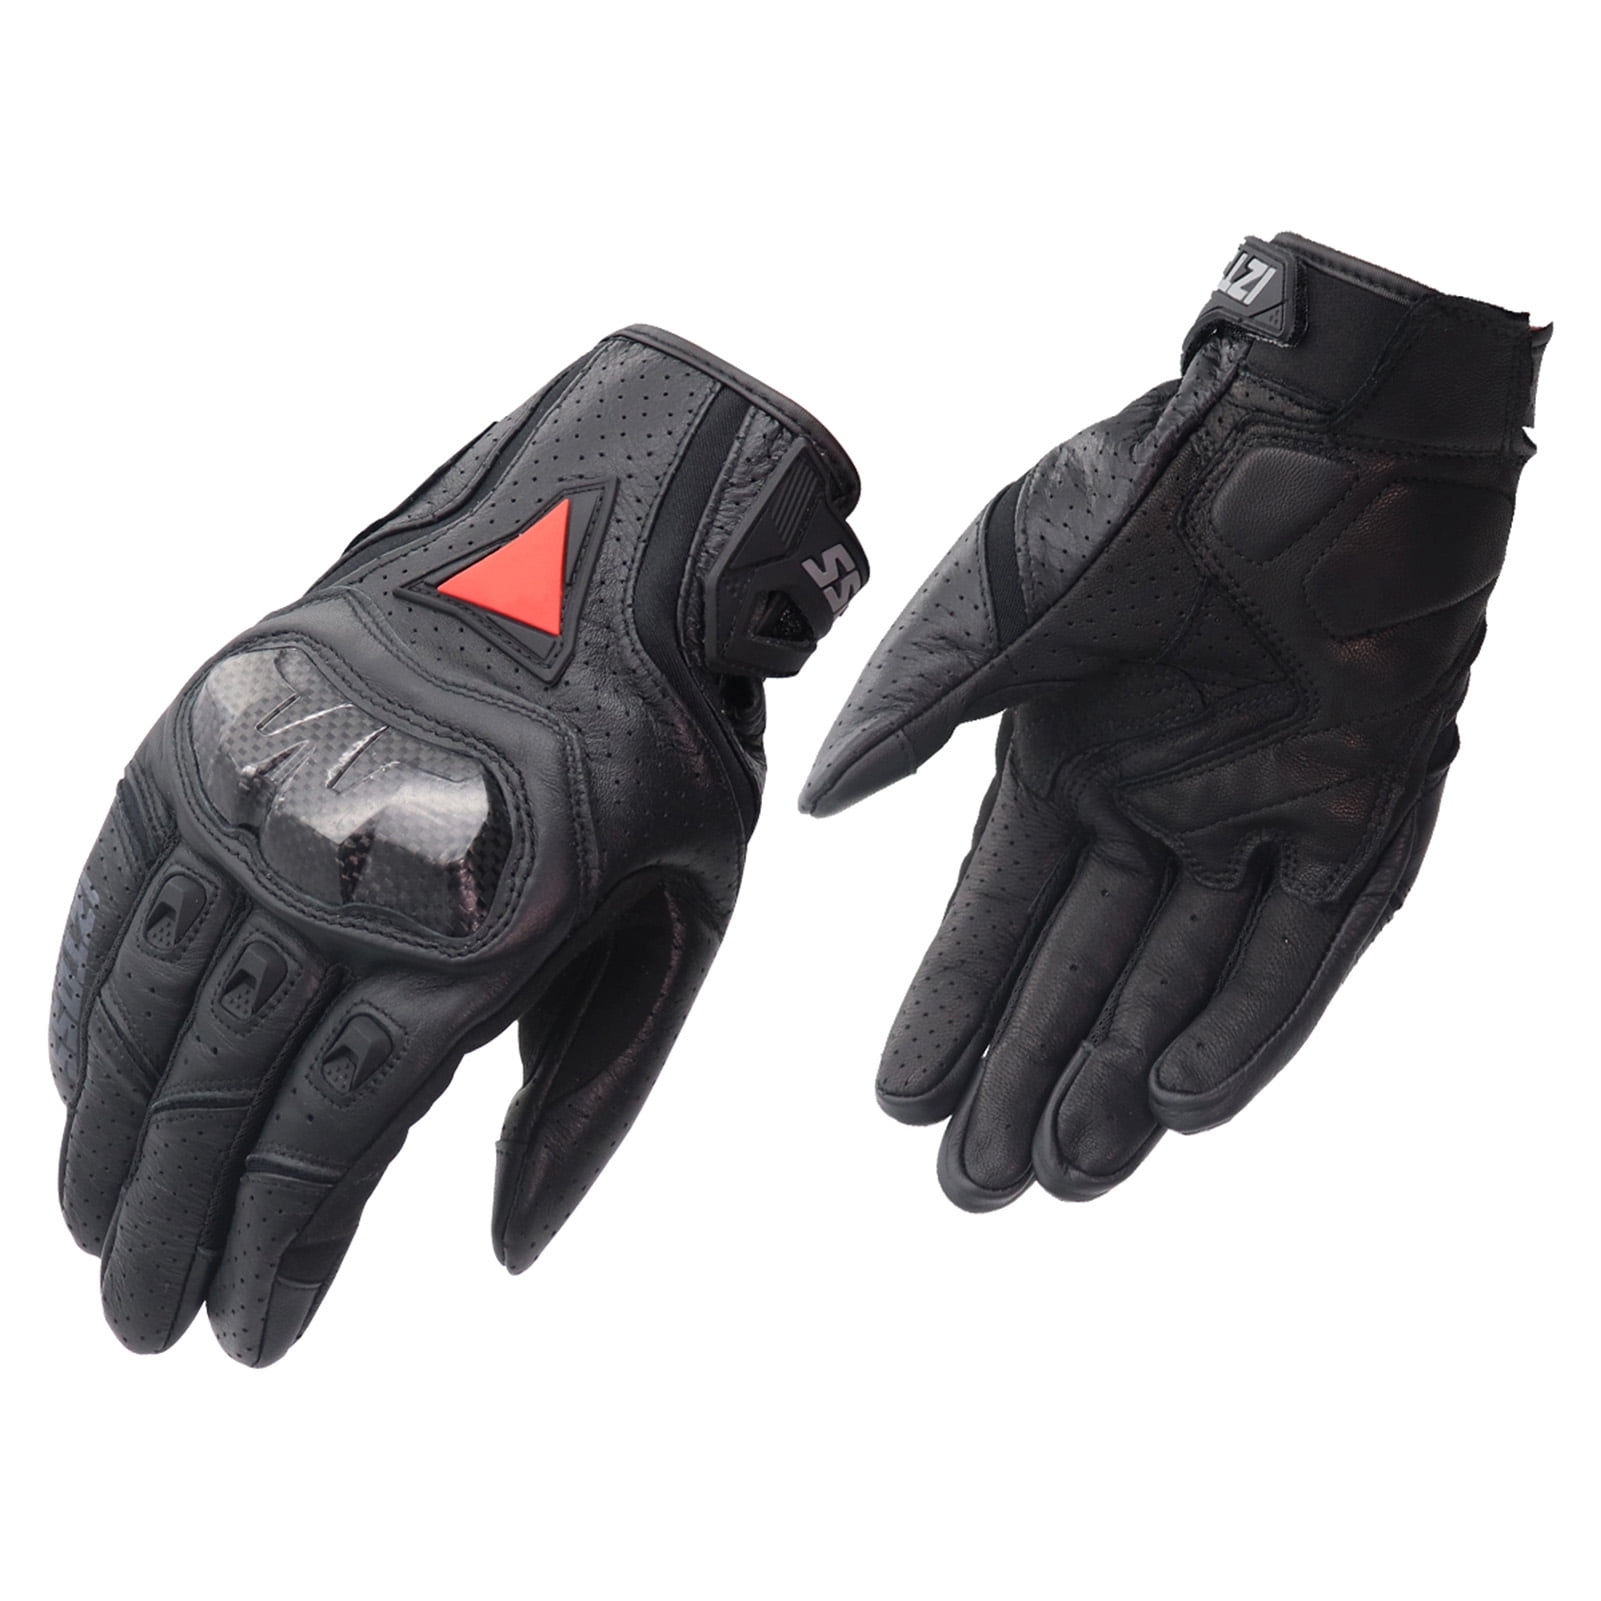 Details about   Motorcycle Gloves Breathable Leather Carbon Cycling Winter ATV Riding Mittens 